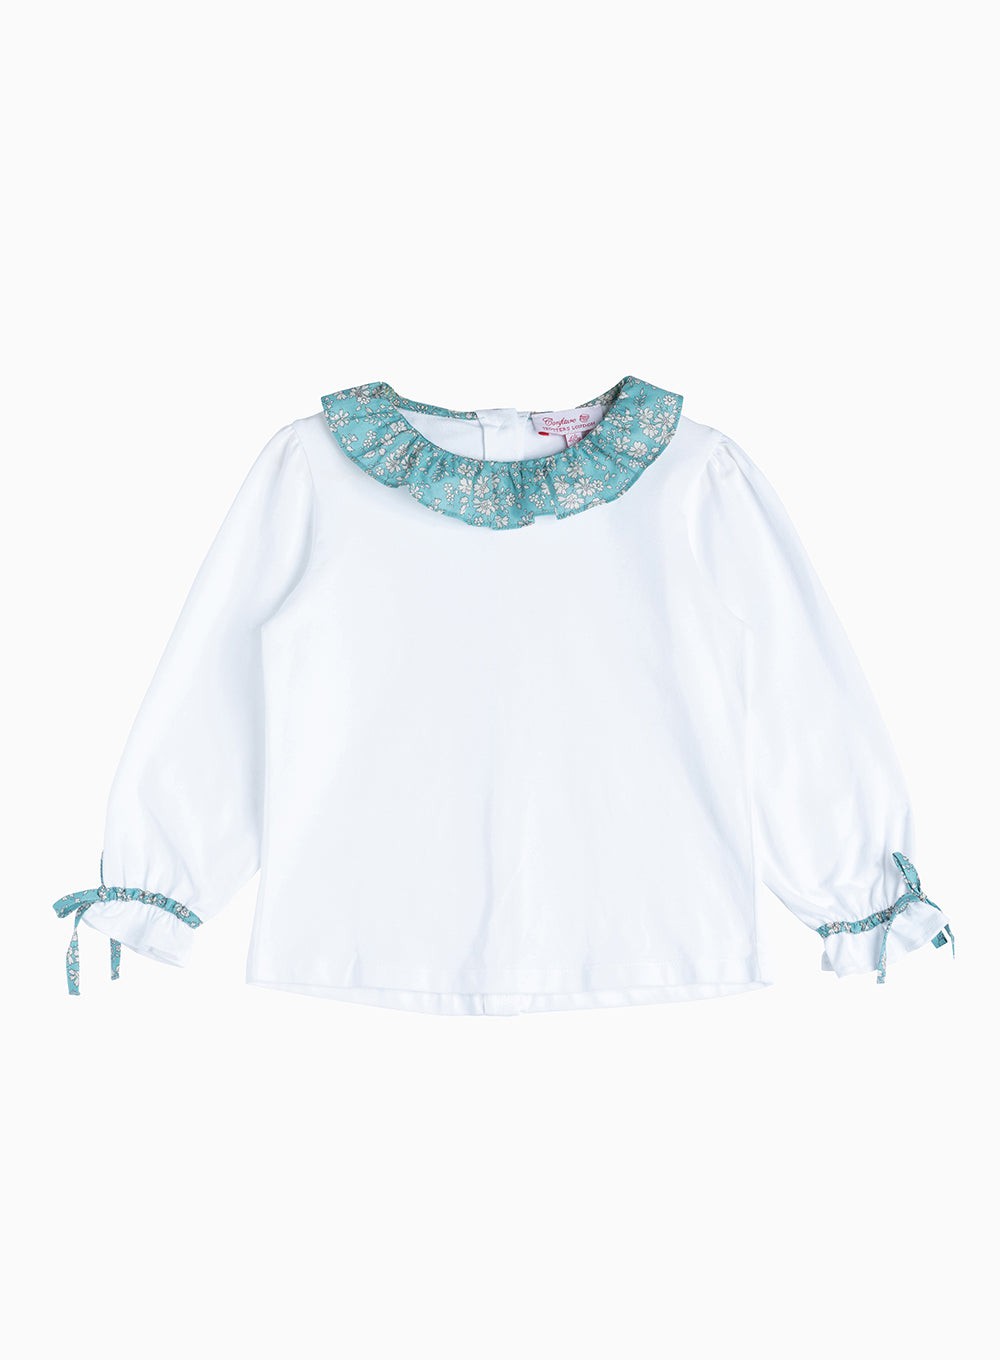 Lily Rose Top Willow Jersey Top in Teal Capel